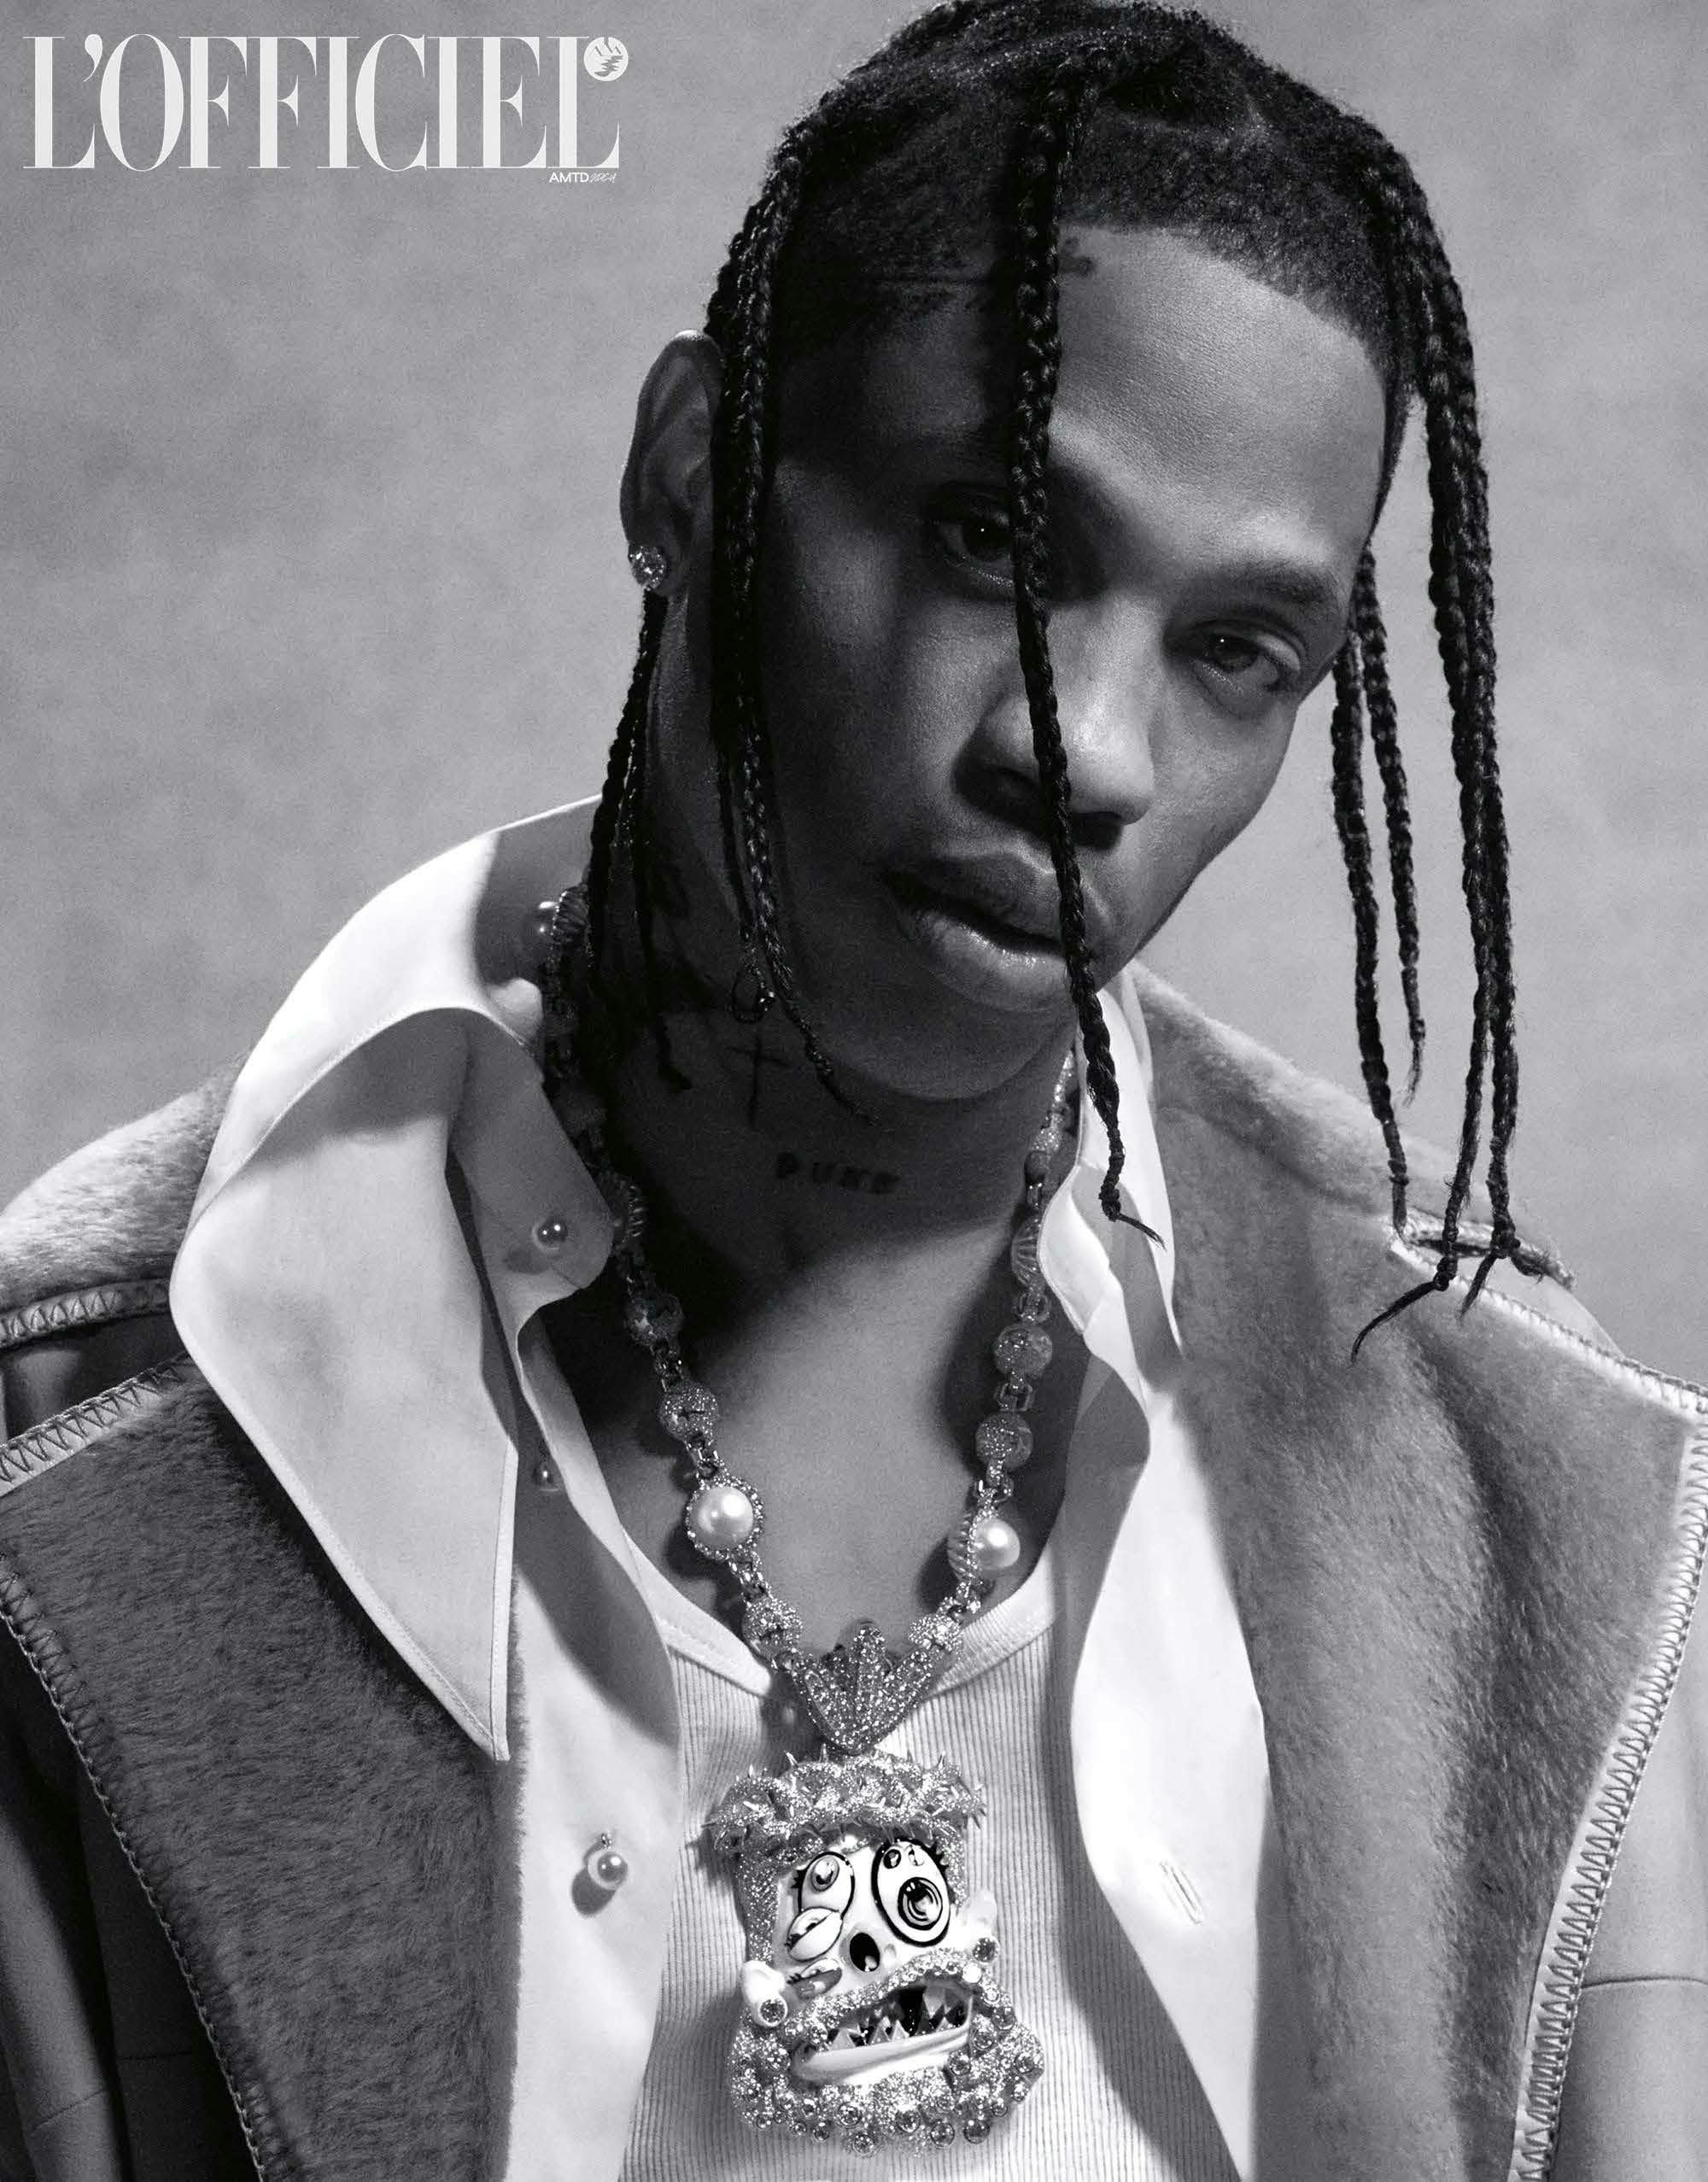 Travis Scott, Bad Bunny and The Weeknd's new song K-POP has nothing to do  with